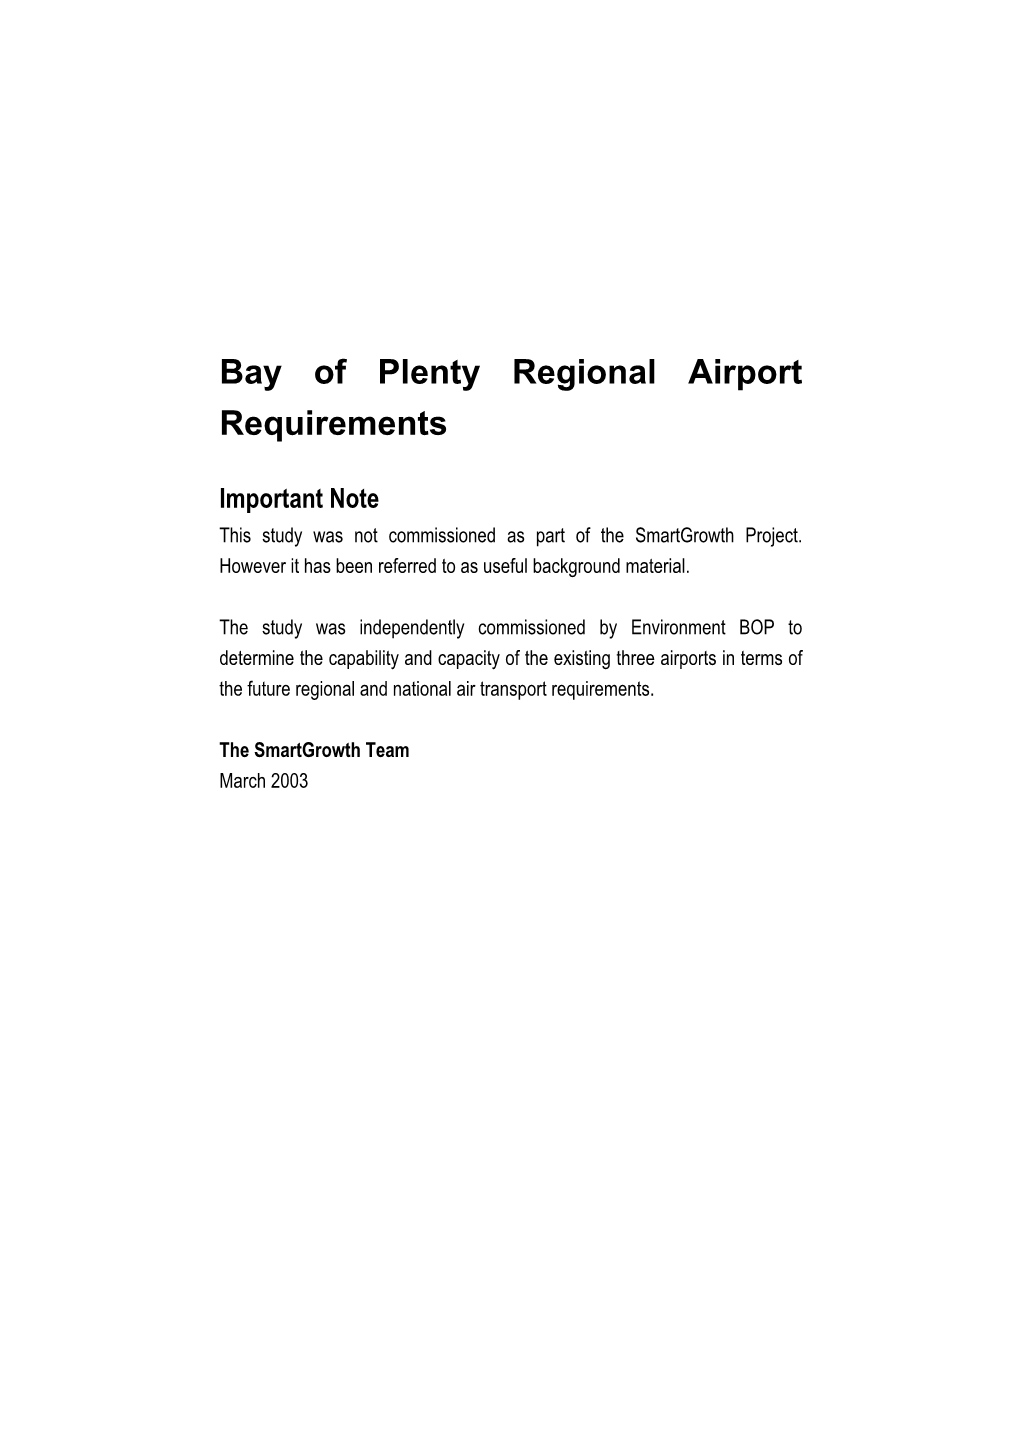 Bay of Plenty Regional Airports Requirements